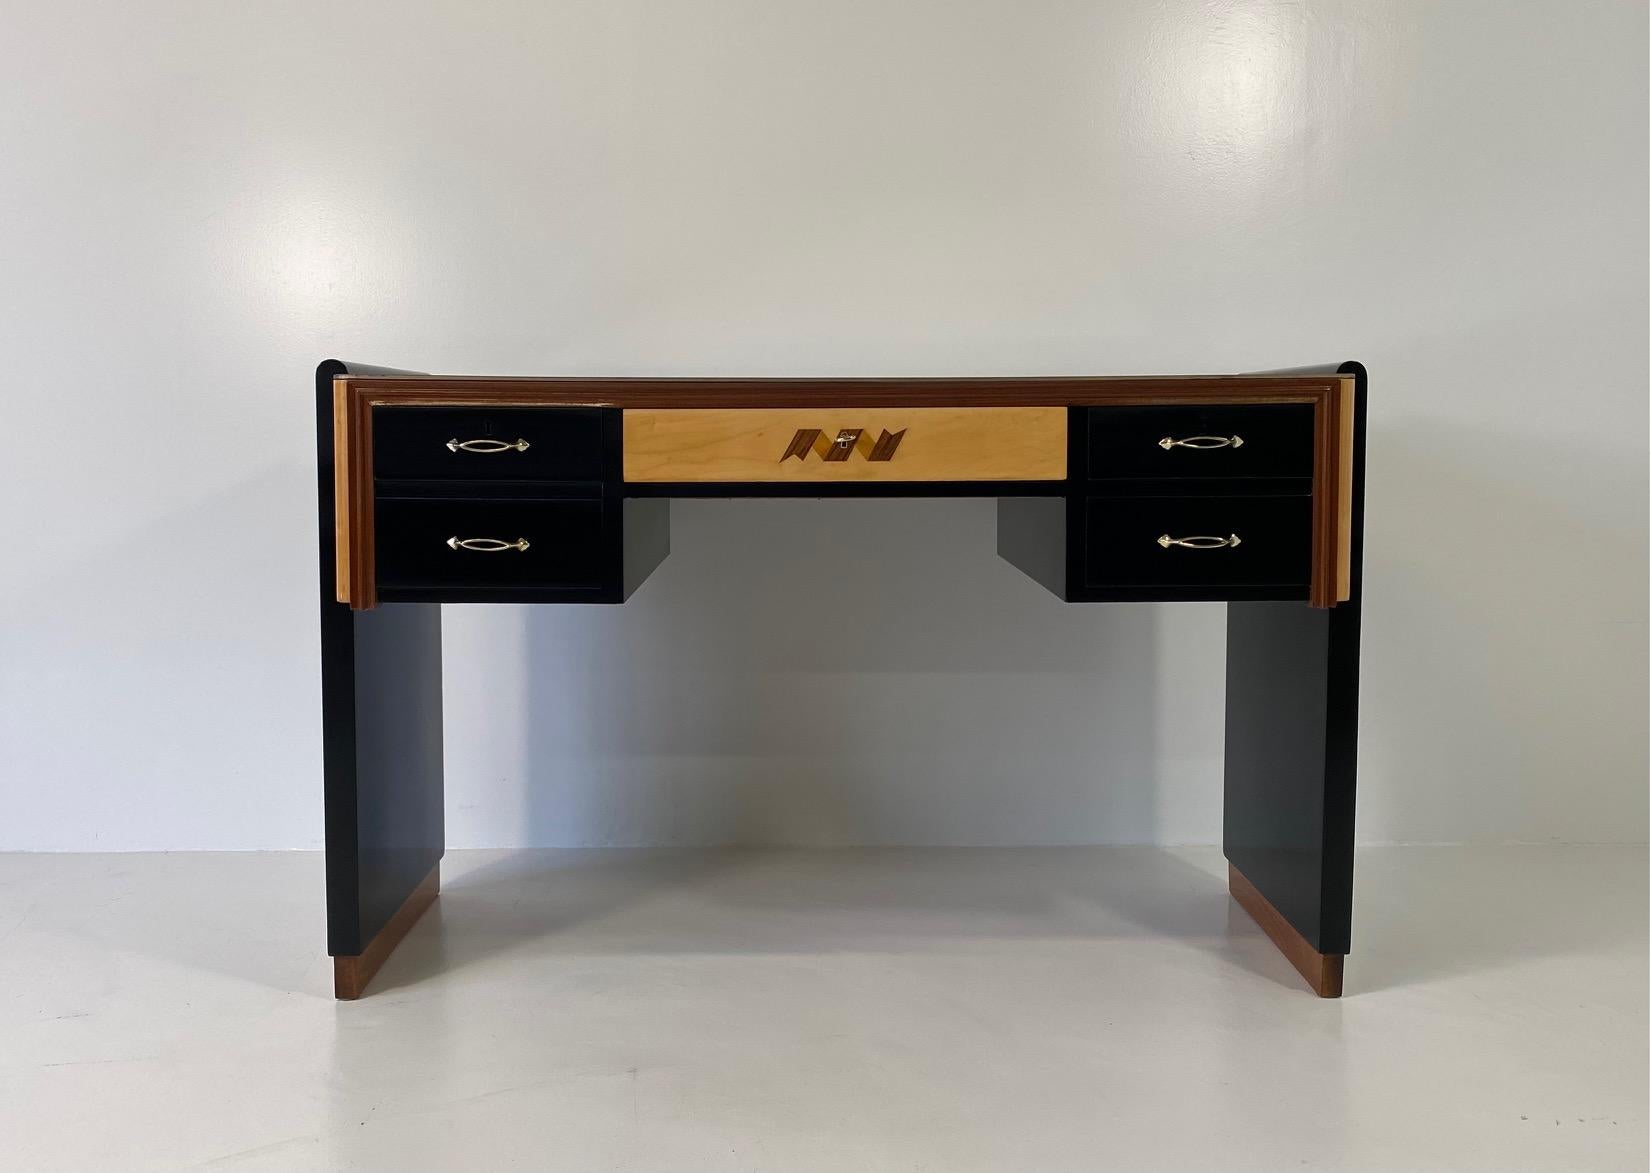 This valuable Art Deco desk was produced in the 1940s, in Cantù (village in the north of Italy) for the famous exposition 'Permanente mobili cantù' and is most likely based on a design by Paolo Buffa.
The desk has a black lacquered structure with